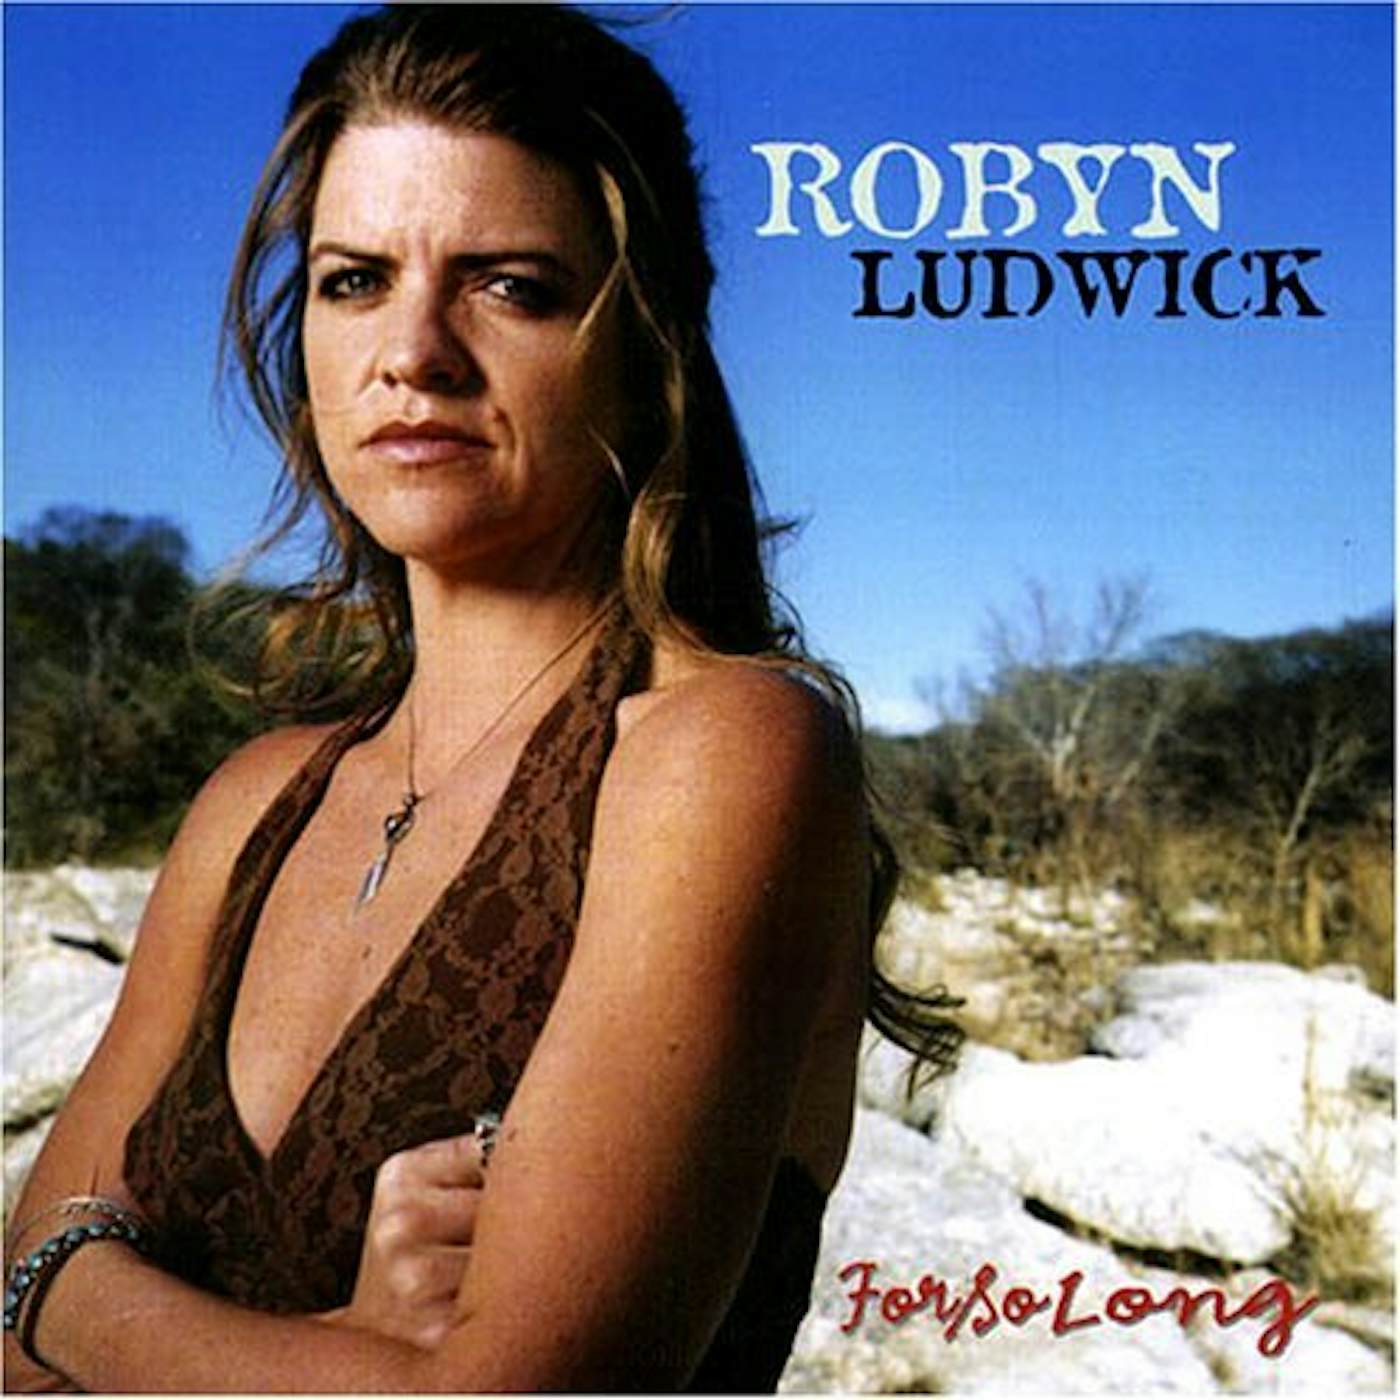 Robyn Ludwick FOR SO LONG CD